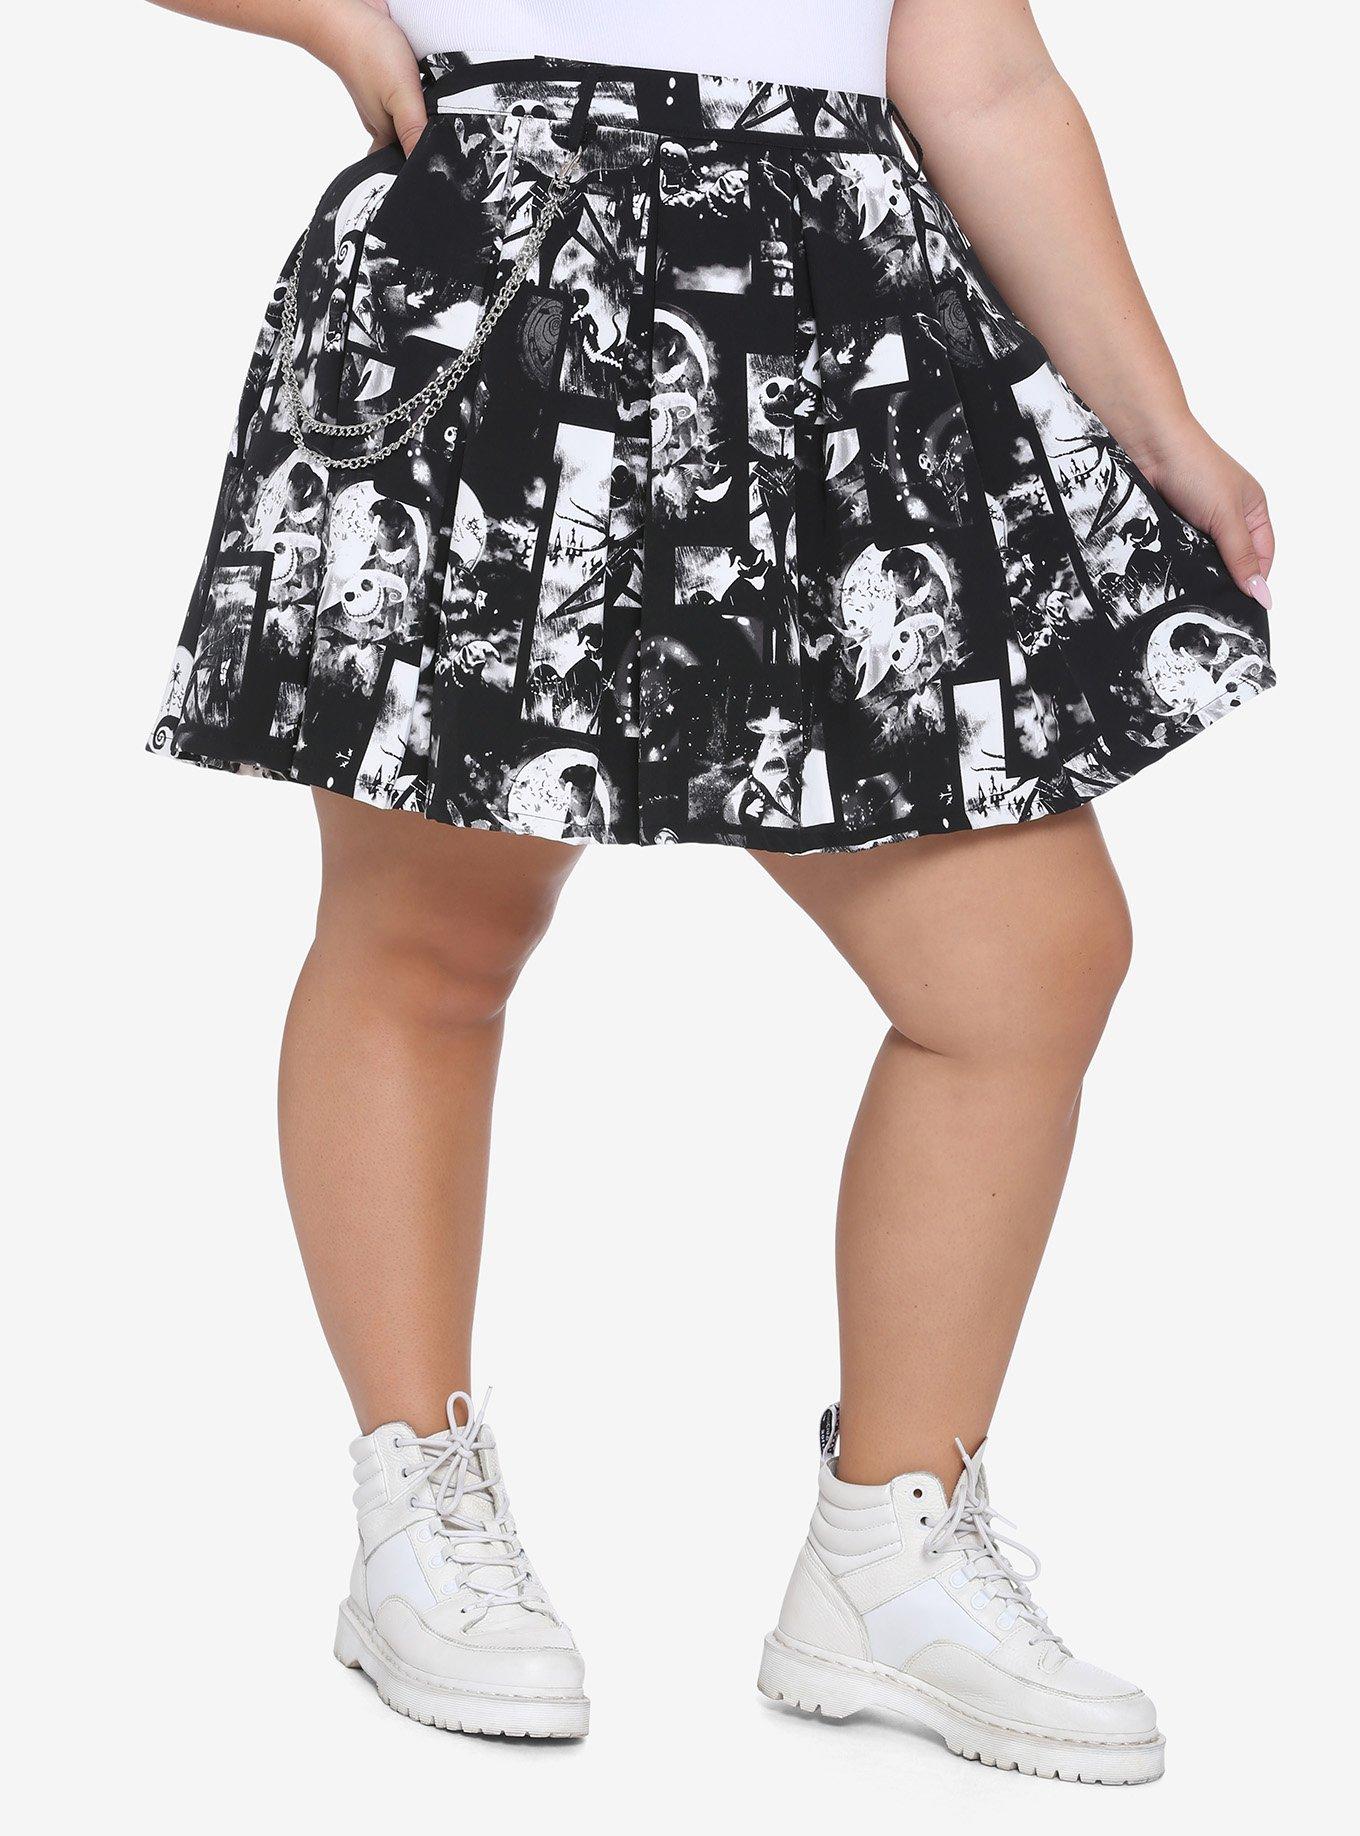 THe Nightmare Before Christmas Black & White Pleated Skirt Plus Size, BLACK, hi-res